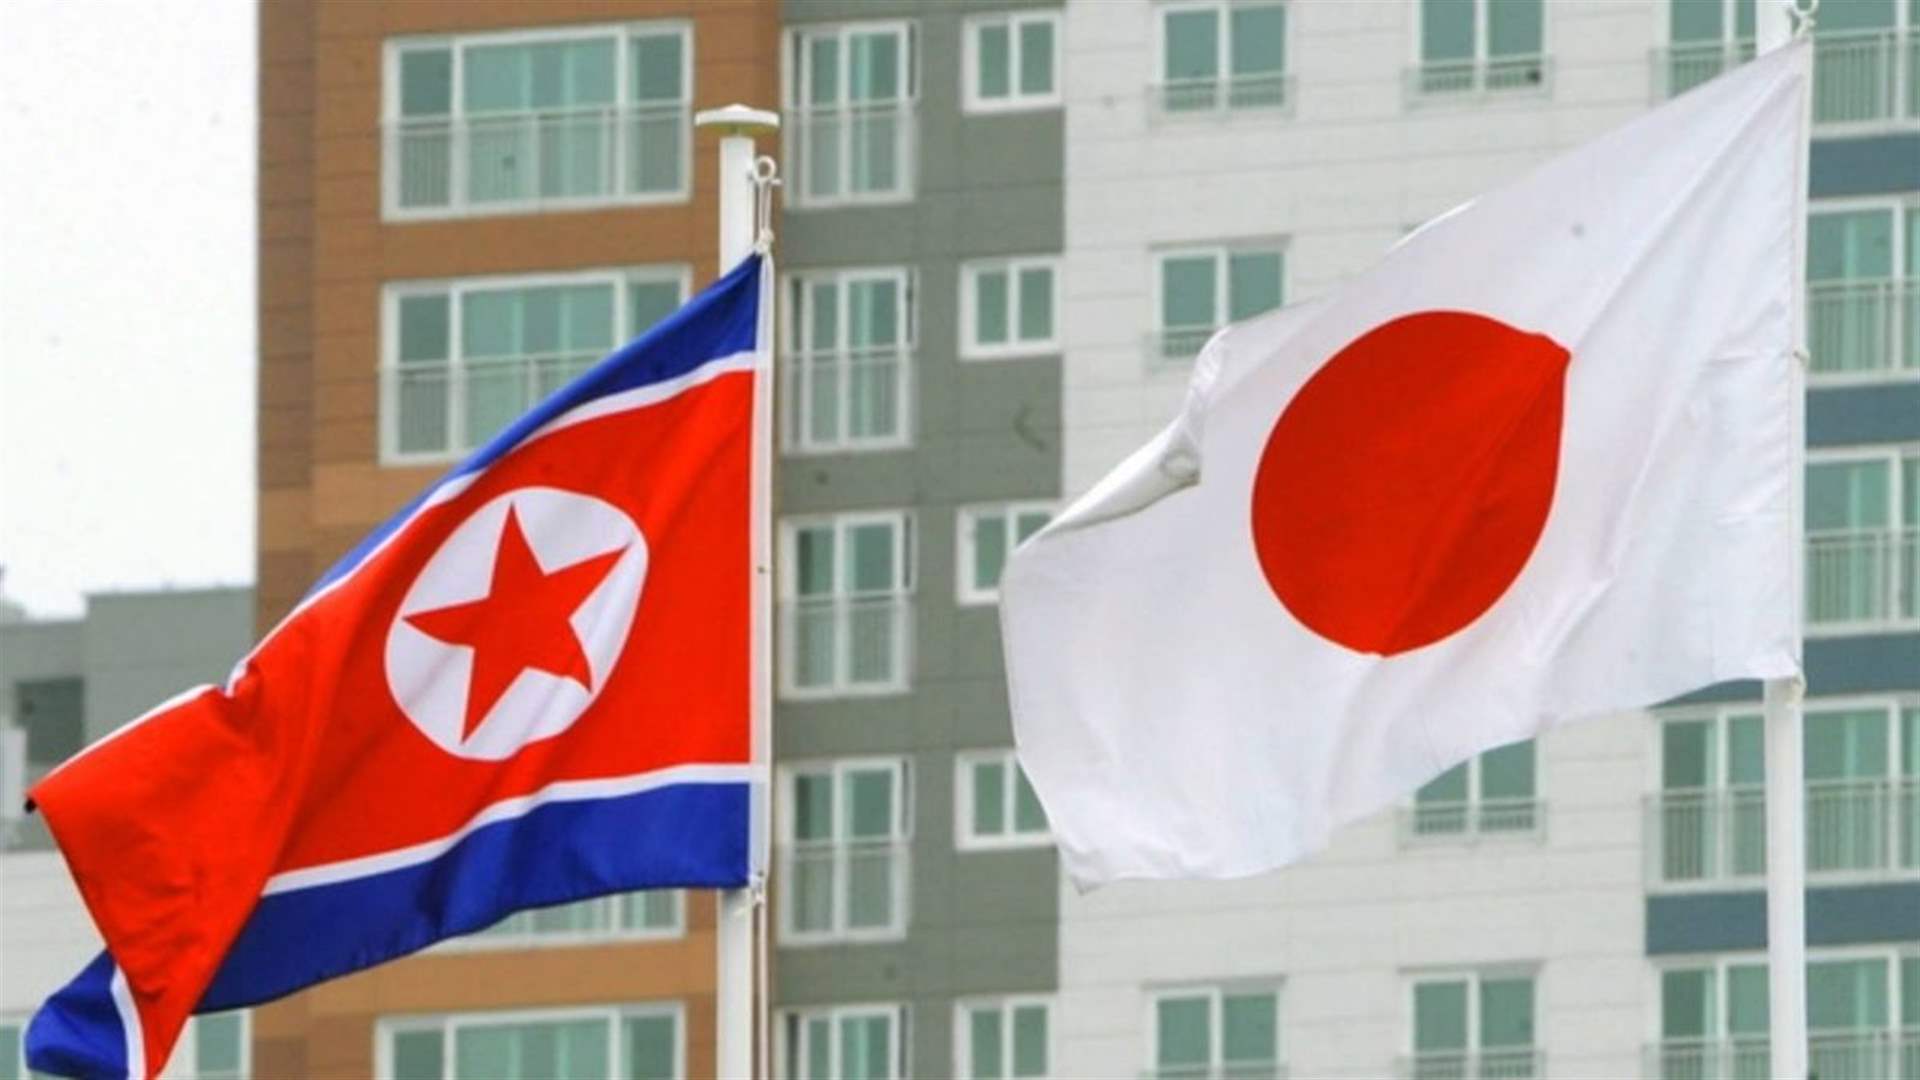 North Korea says no interest in summit with Japan, rejects more talks